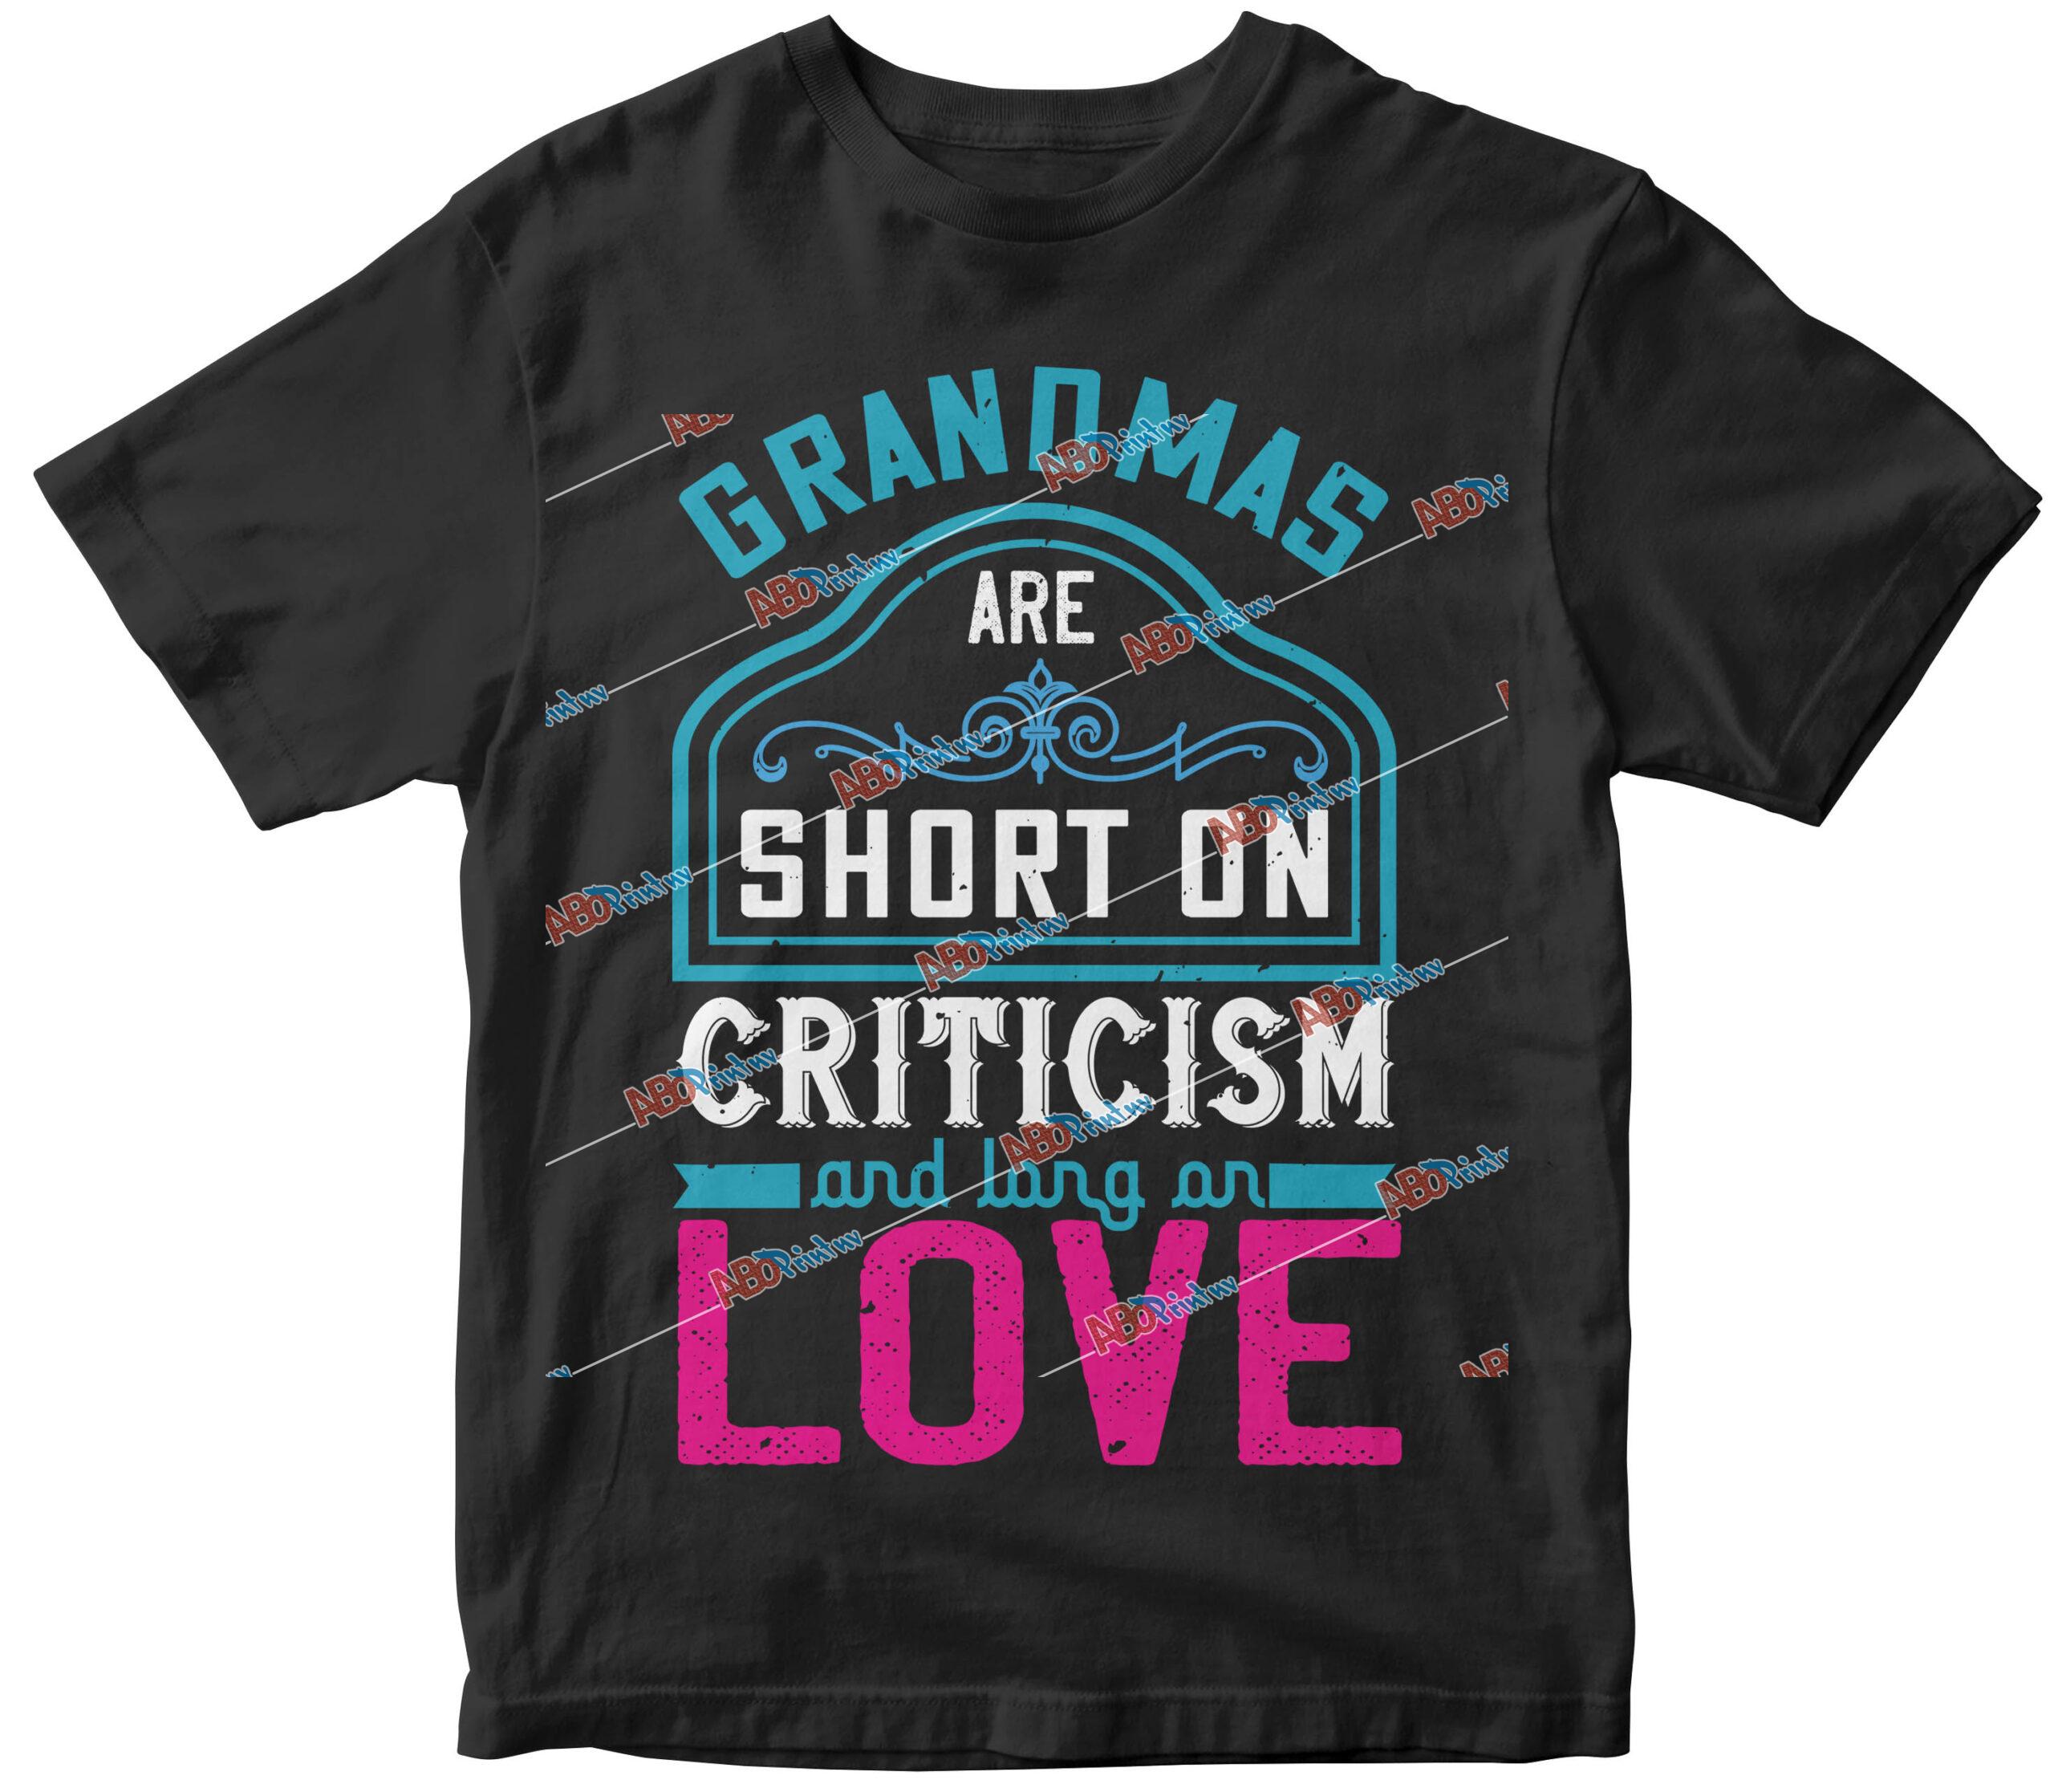 Grandmas are short on criticism and long on love.jpg